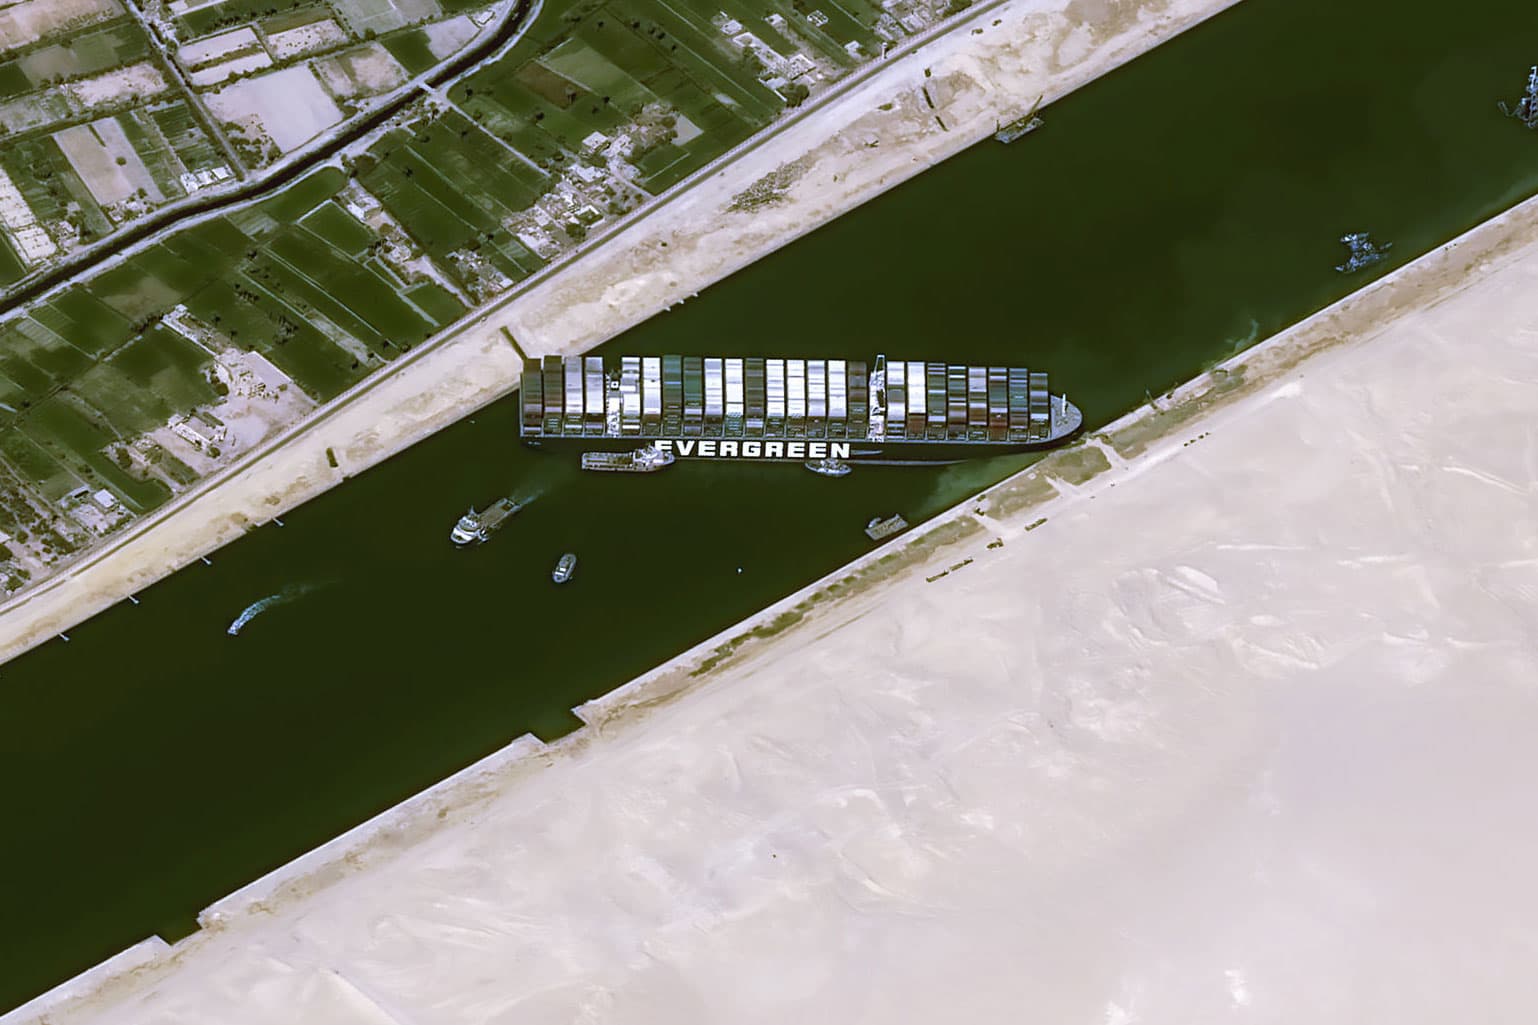 Blockade of ships in the Suez Canal is beginning to affect the global economy